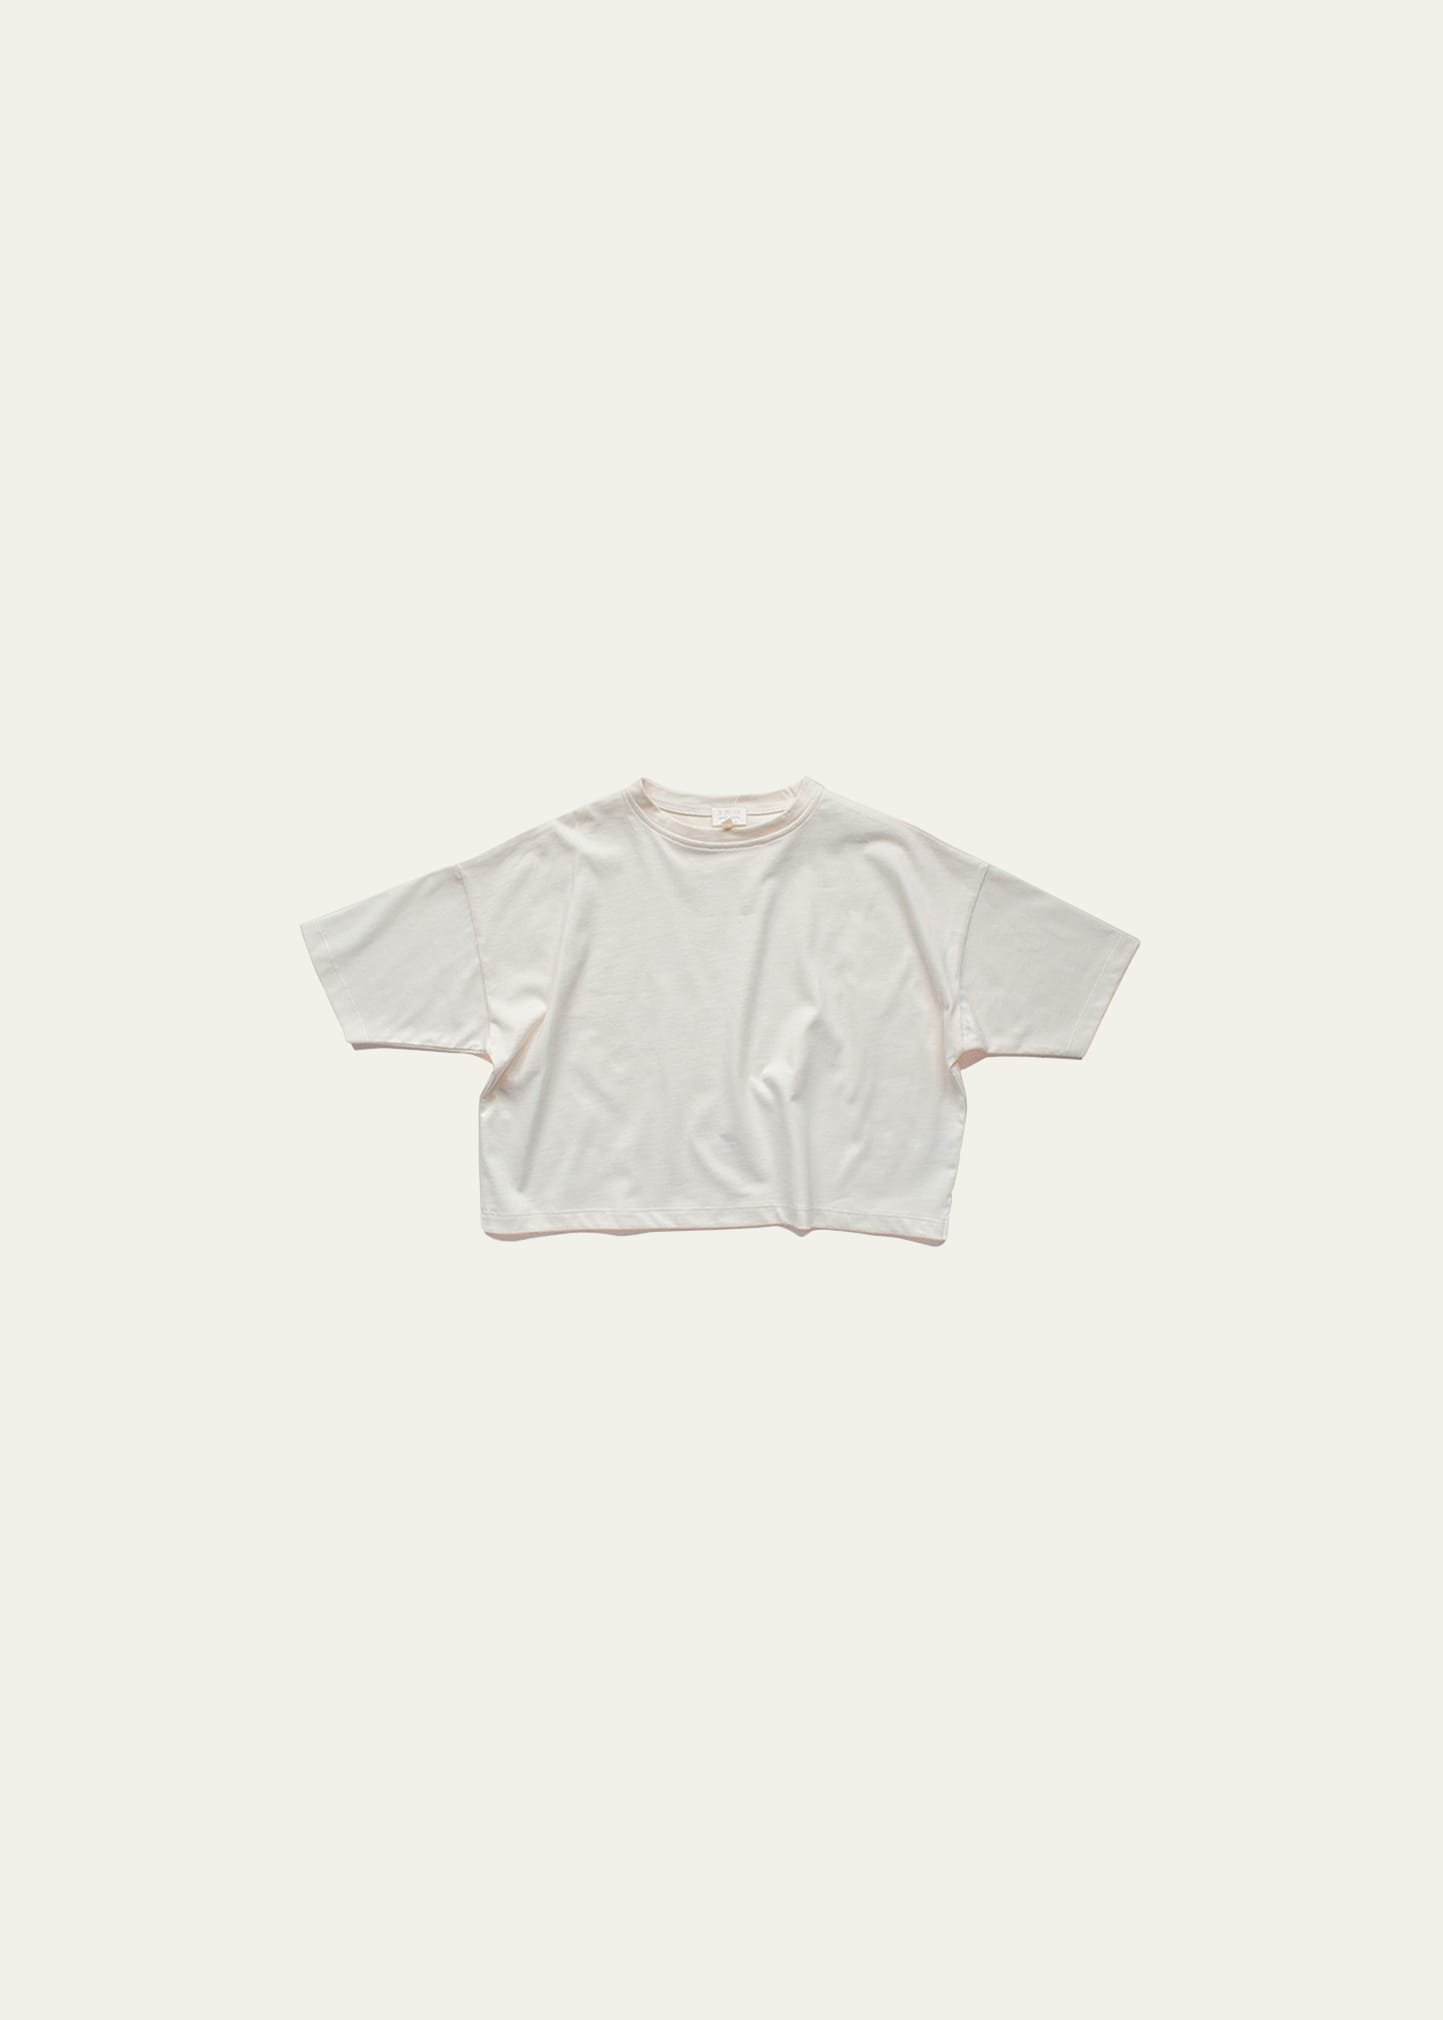 The Simple Folk Child Boy And Child Girl Organic Cotton Oversized Tee In Undyed